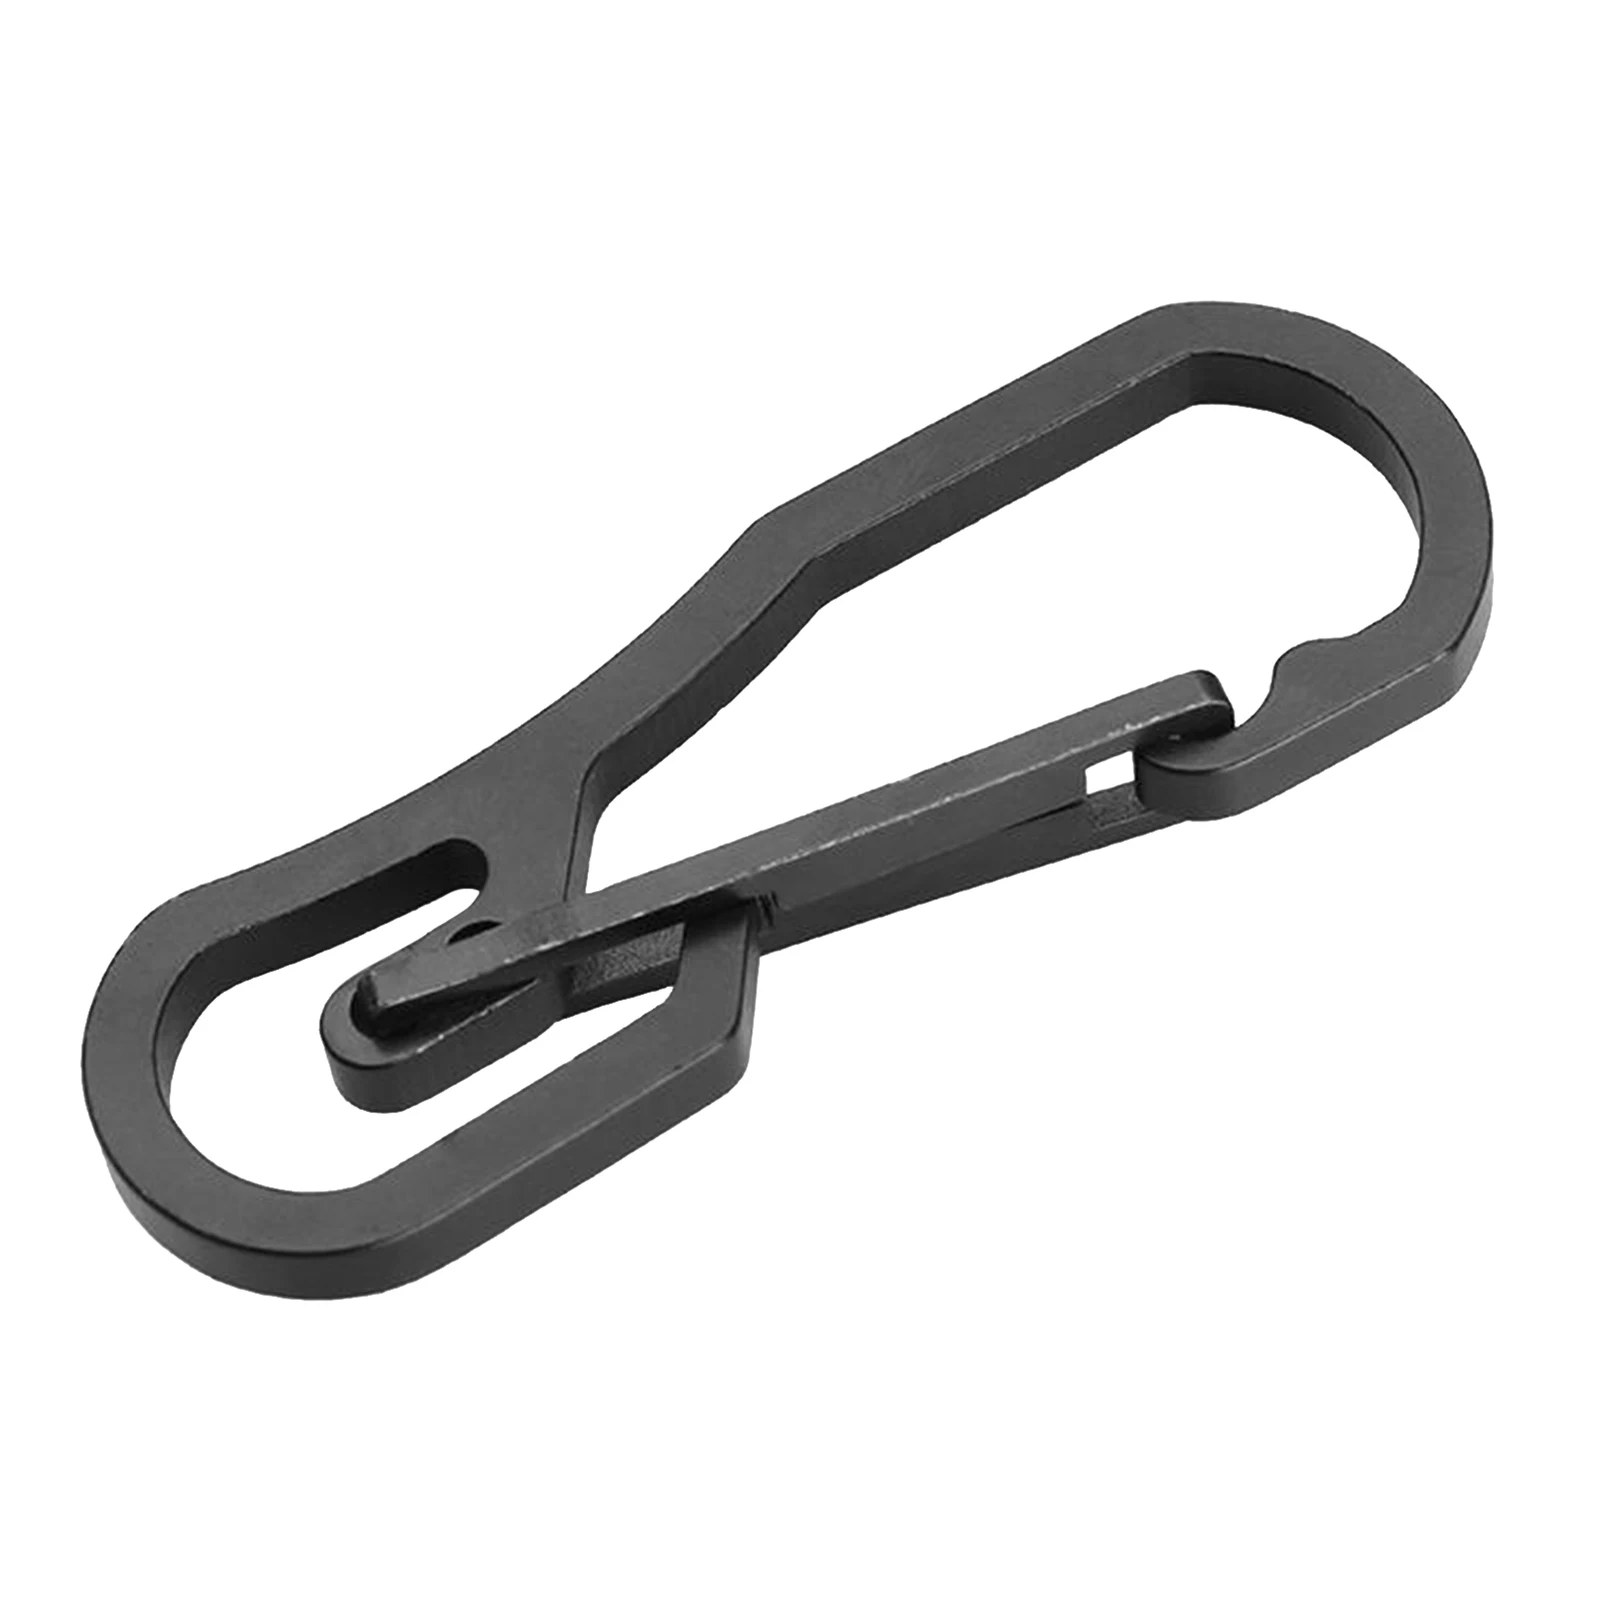 Keychain Key Ring Hook Outdoor Stainless Steel Buckle Carabiner Climbing Hiking